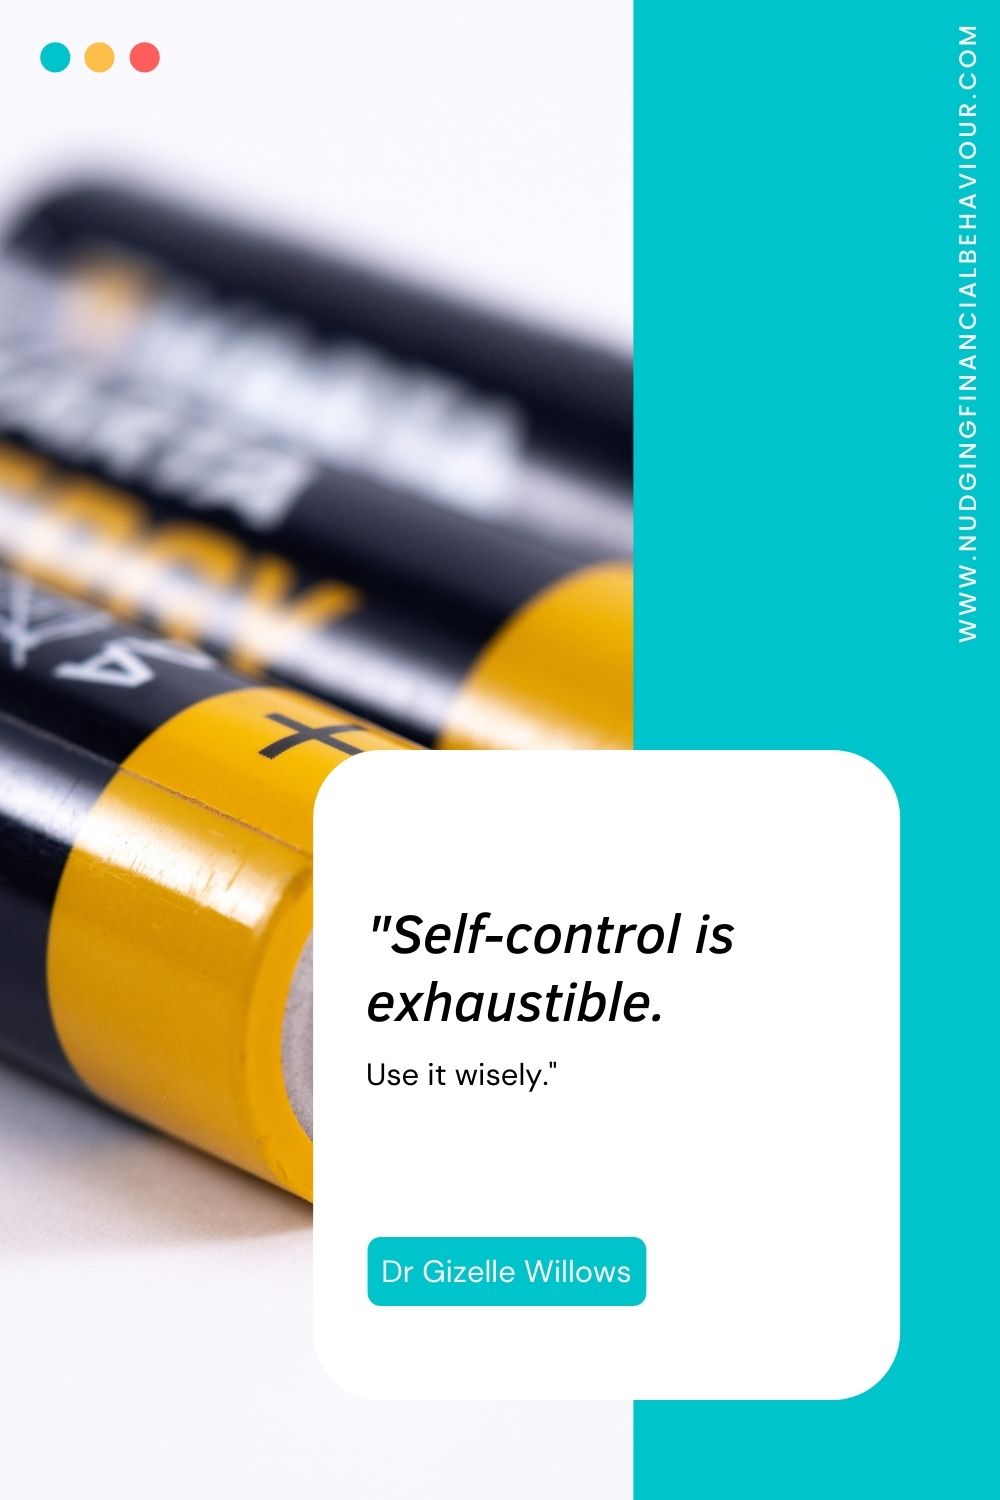 Self-control is exhaustible